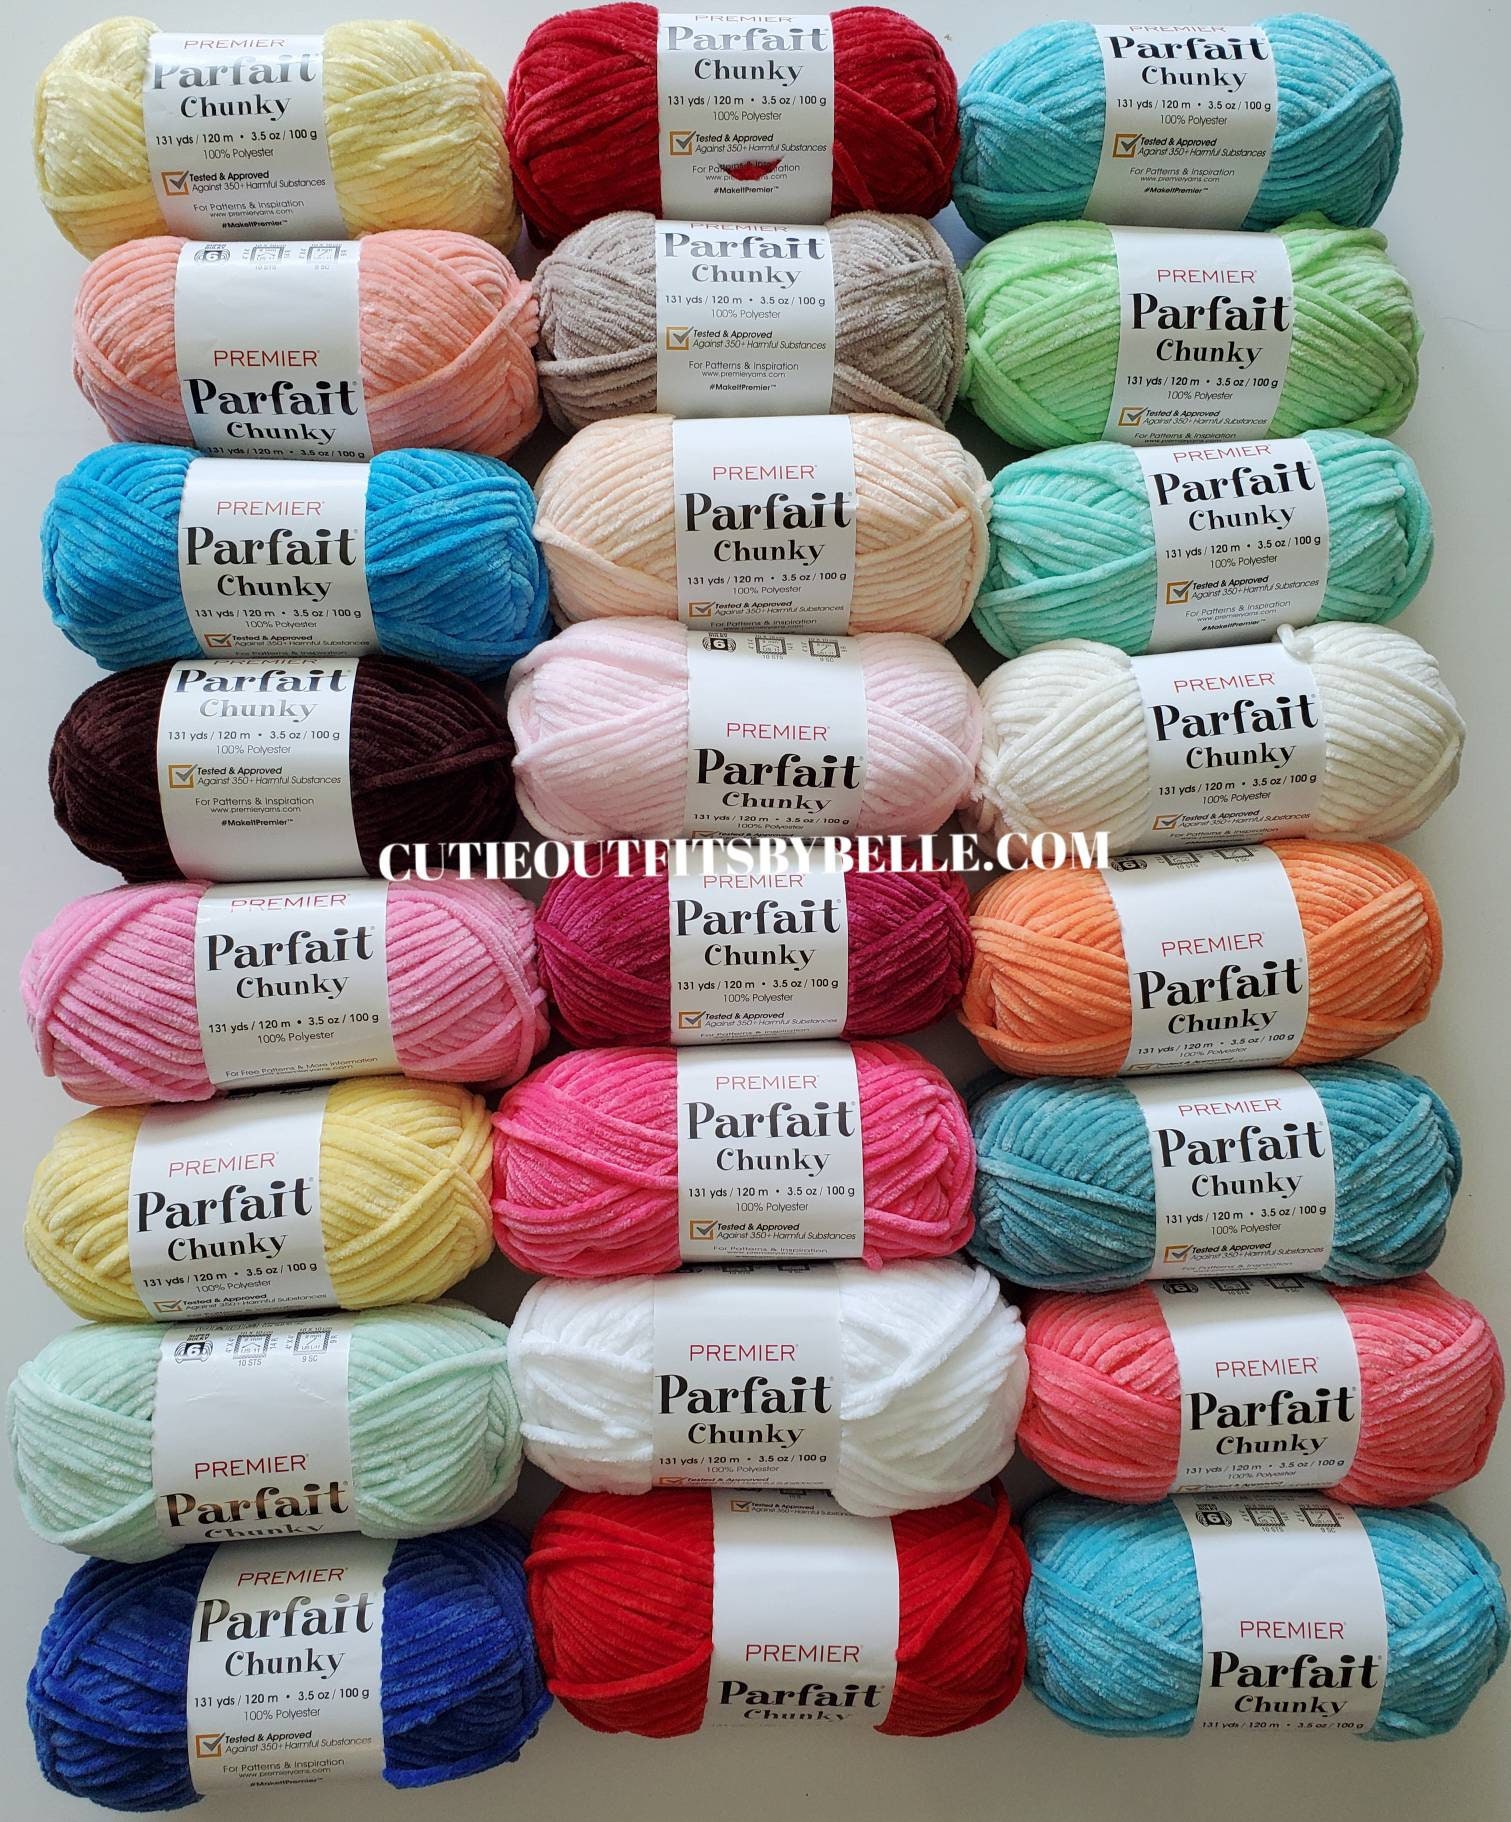 Save BIG on Premier Parfait® Chunky Premier Yarns. You will find the most  effective products with great prices and outstanding customer service